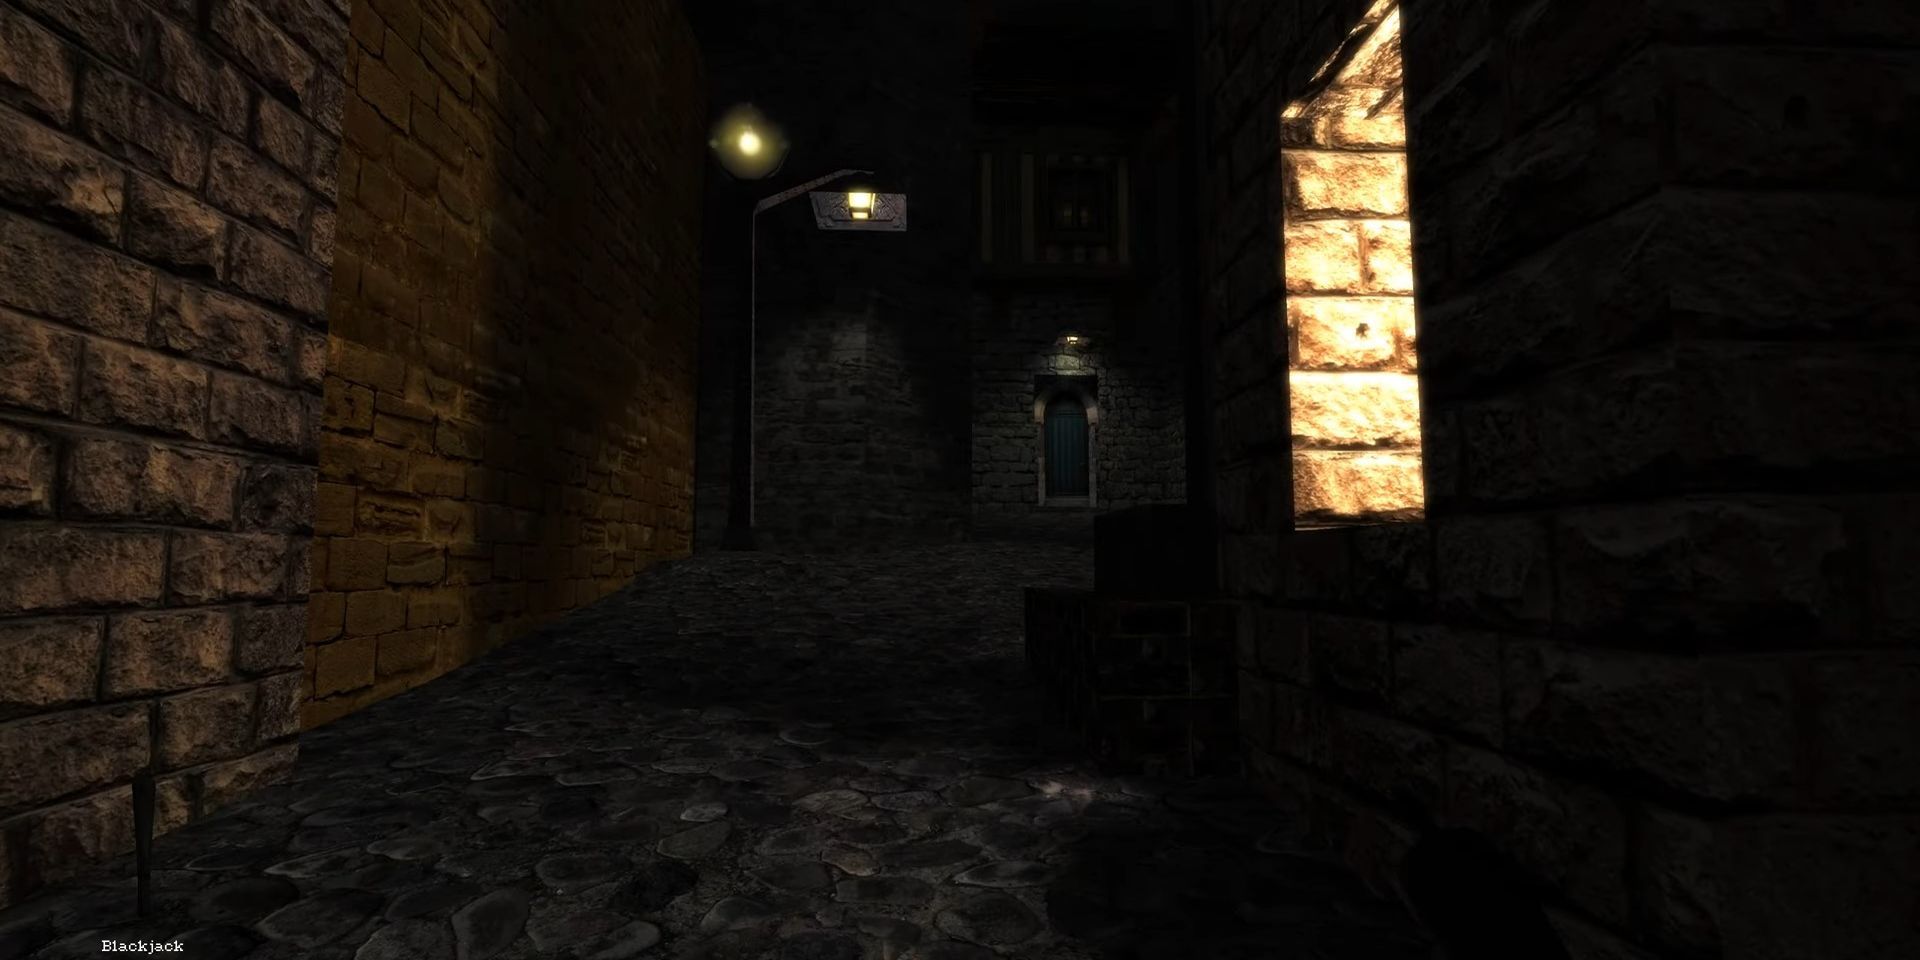 A screen from Thief Gold, showing the street at night and the currently hold item, a blackjack